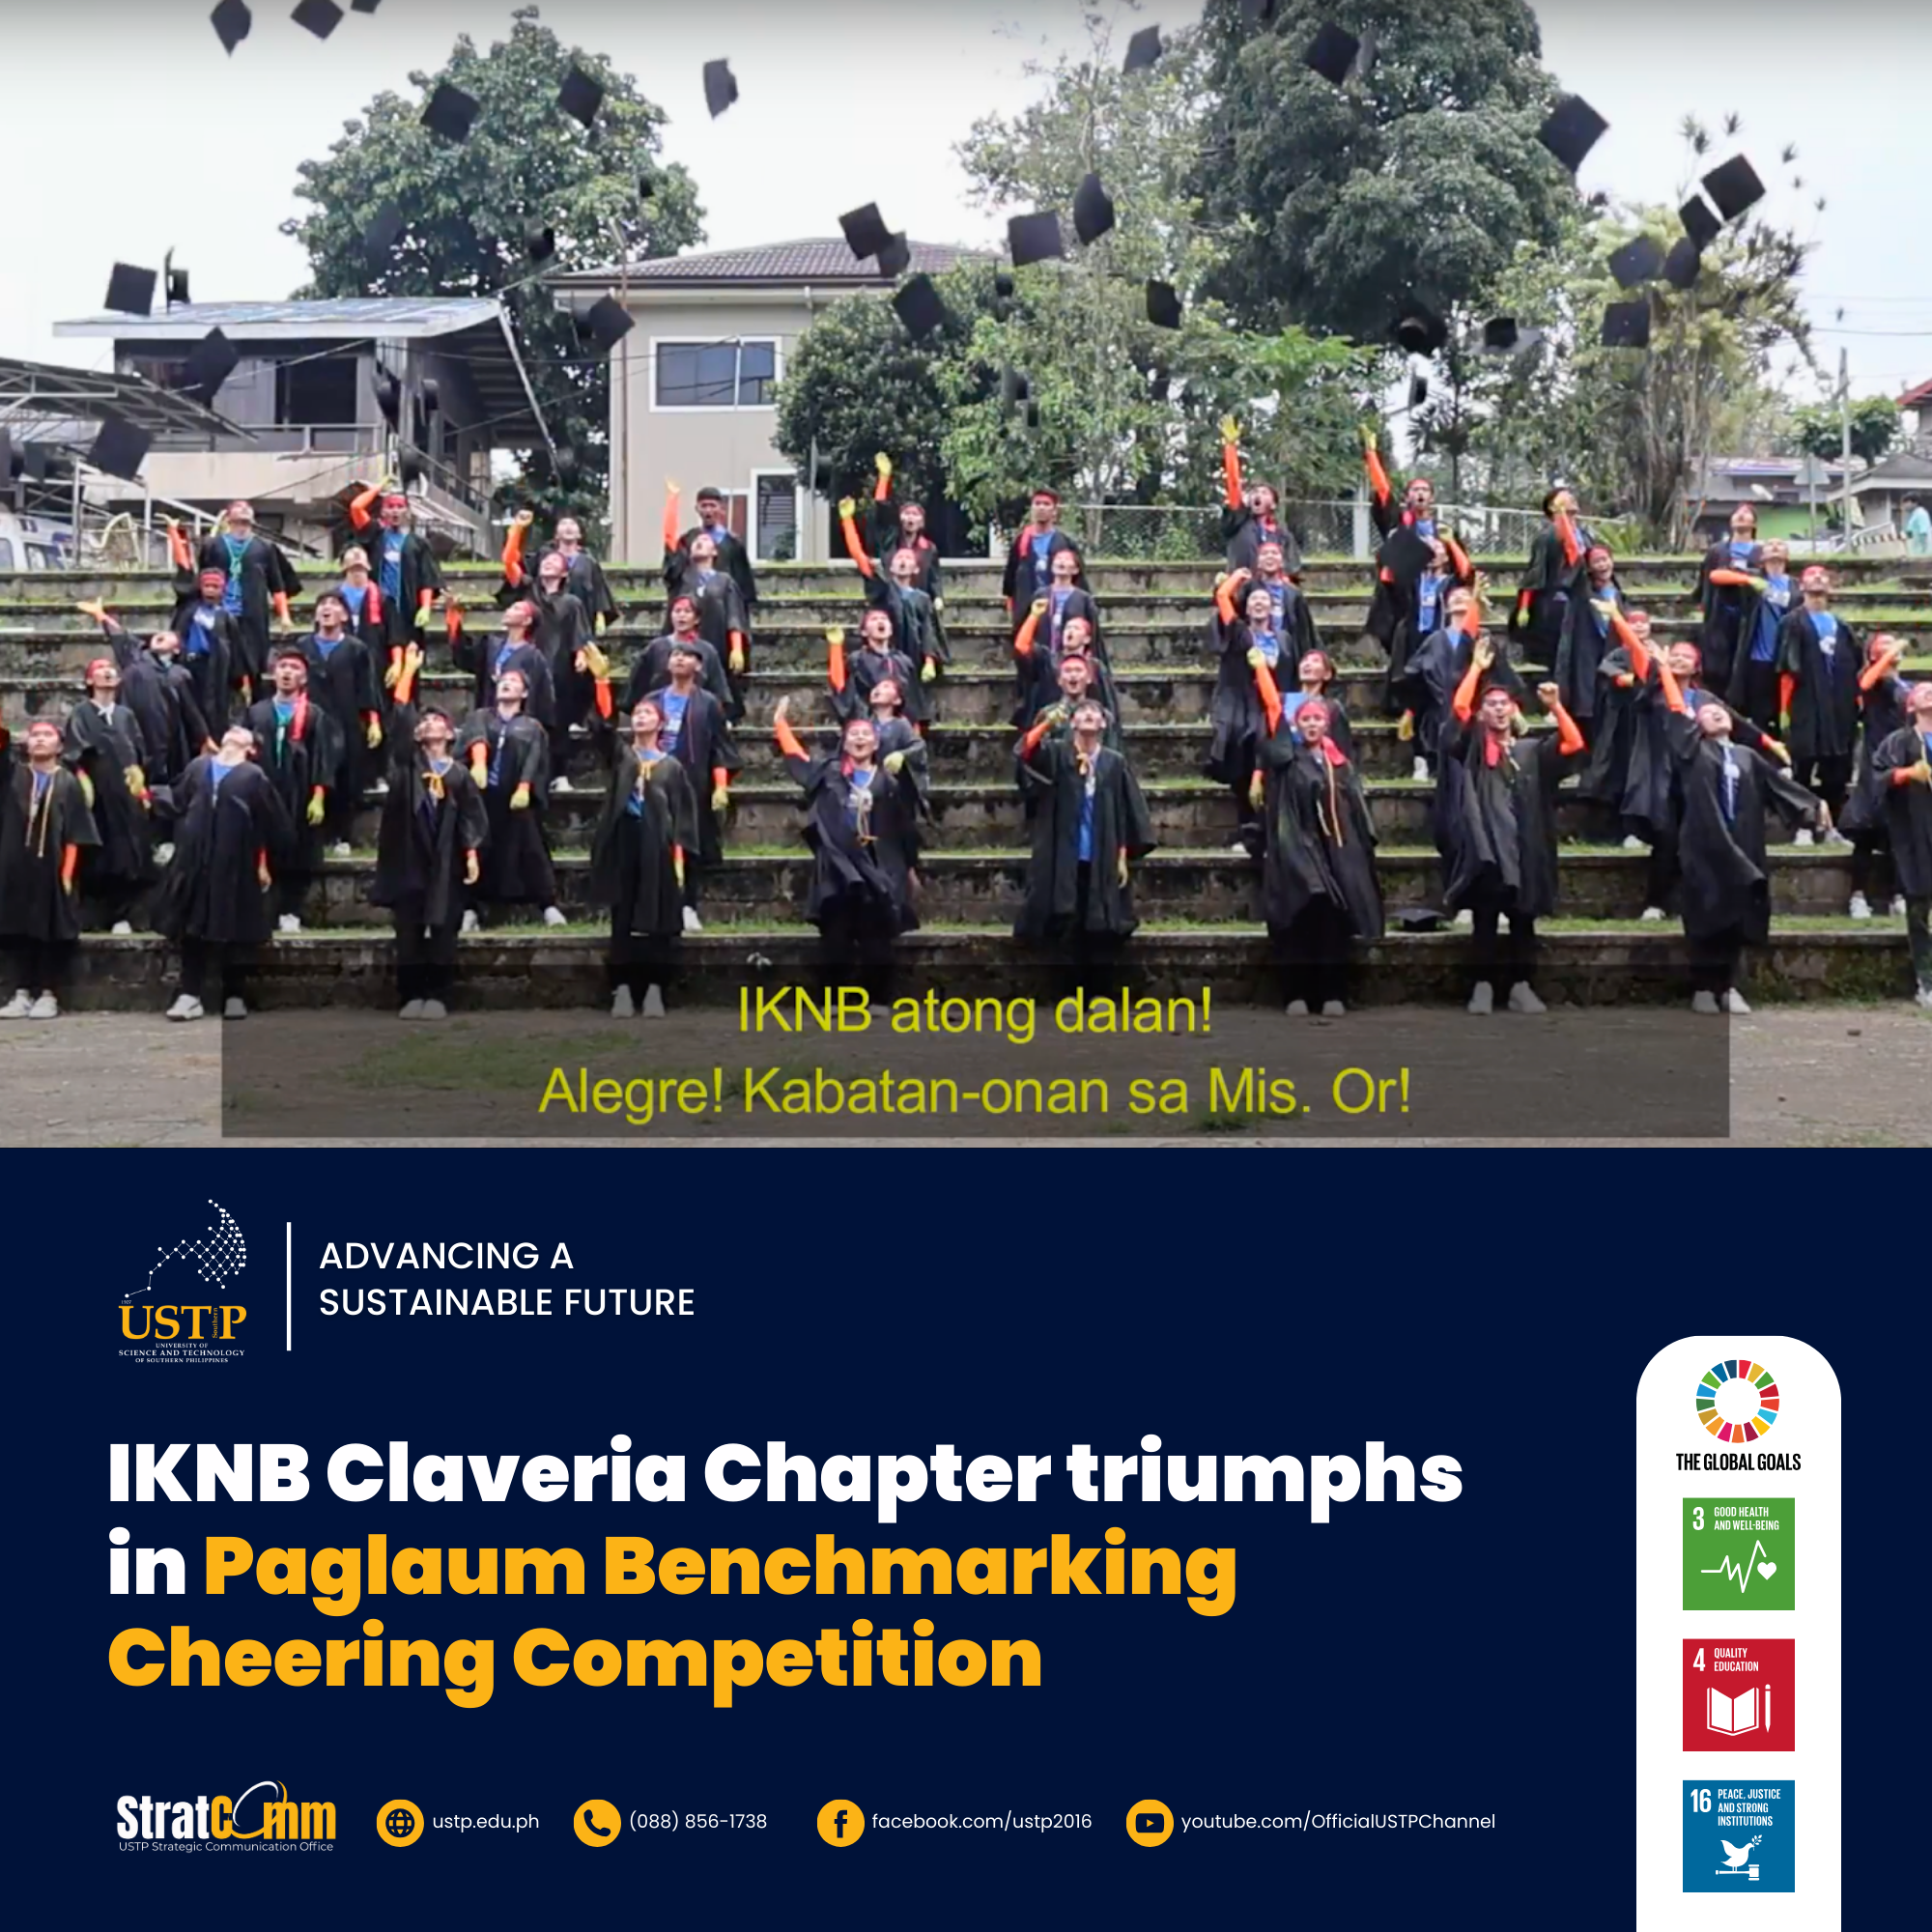 IKNB Claveria Chapter triumphs in Paglaum Benchmarking Cheering Competition